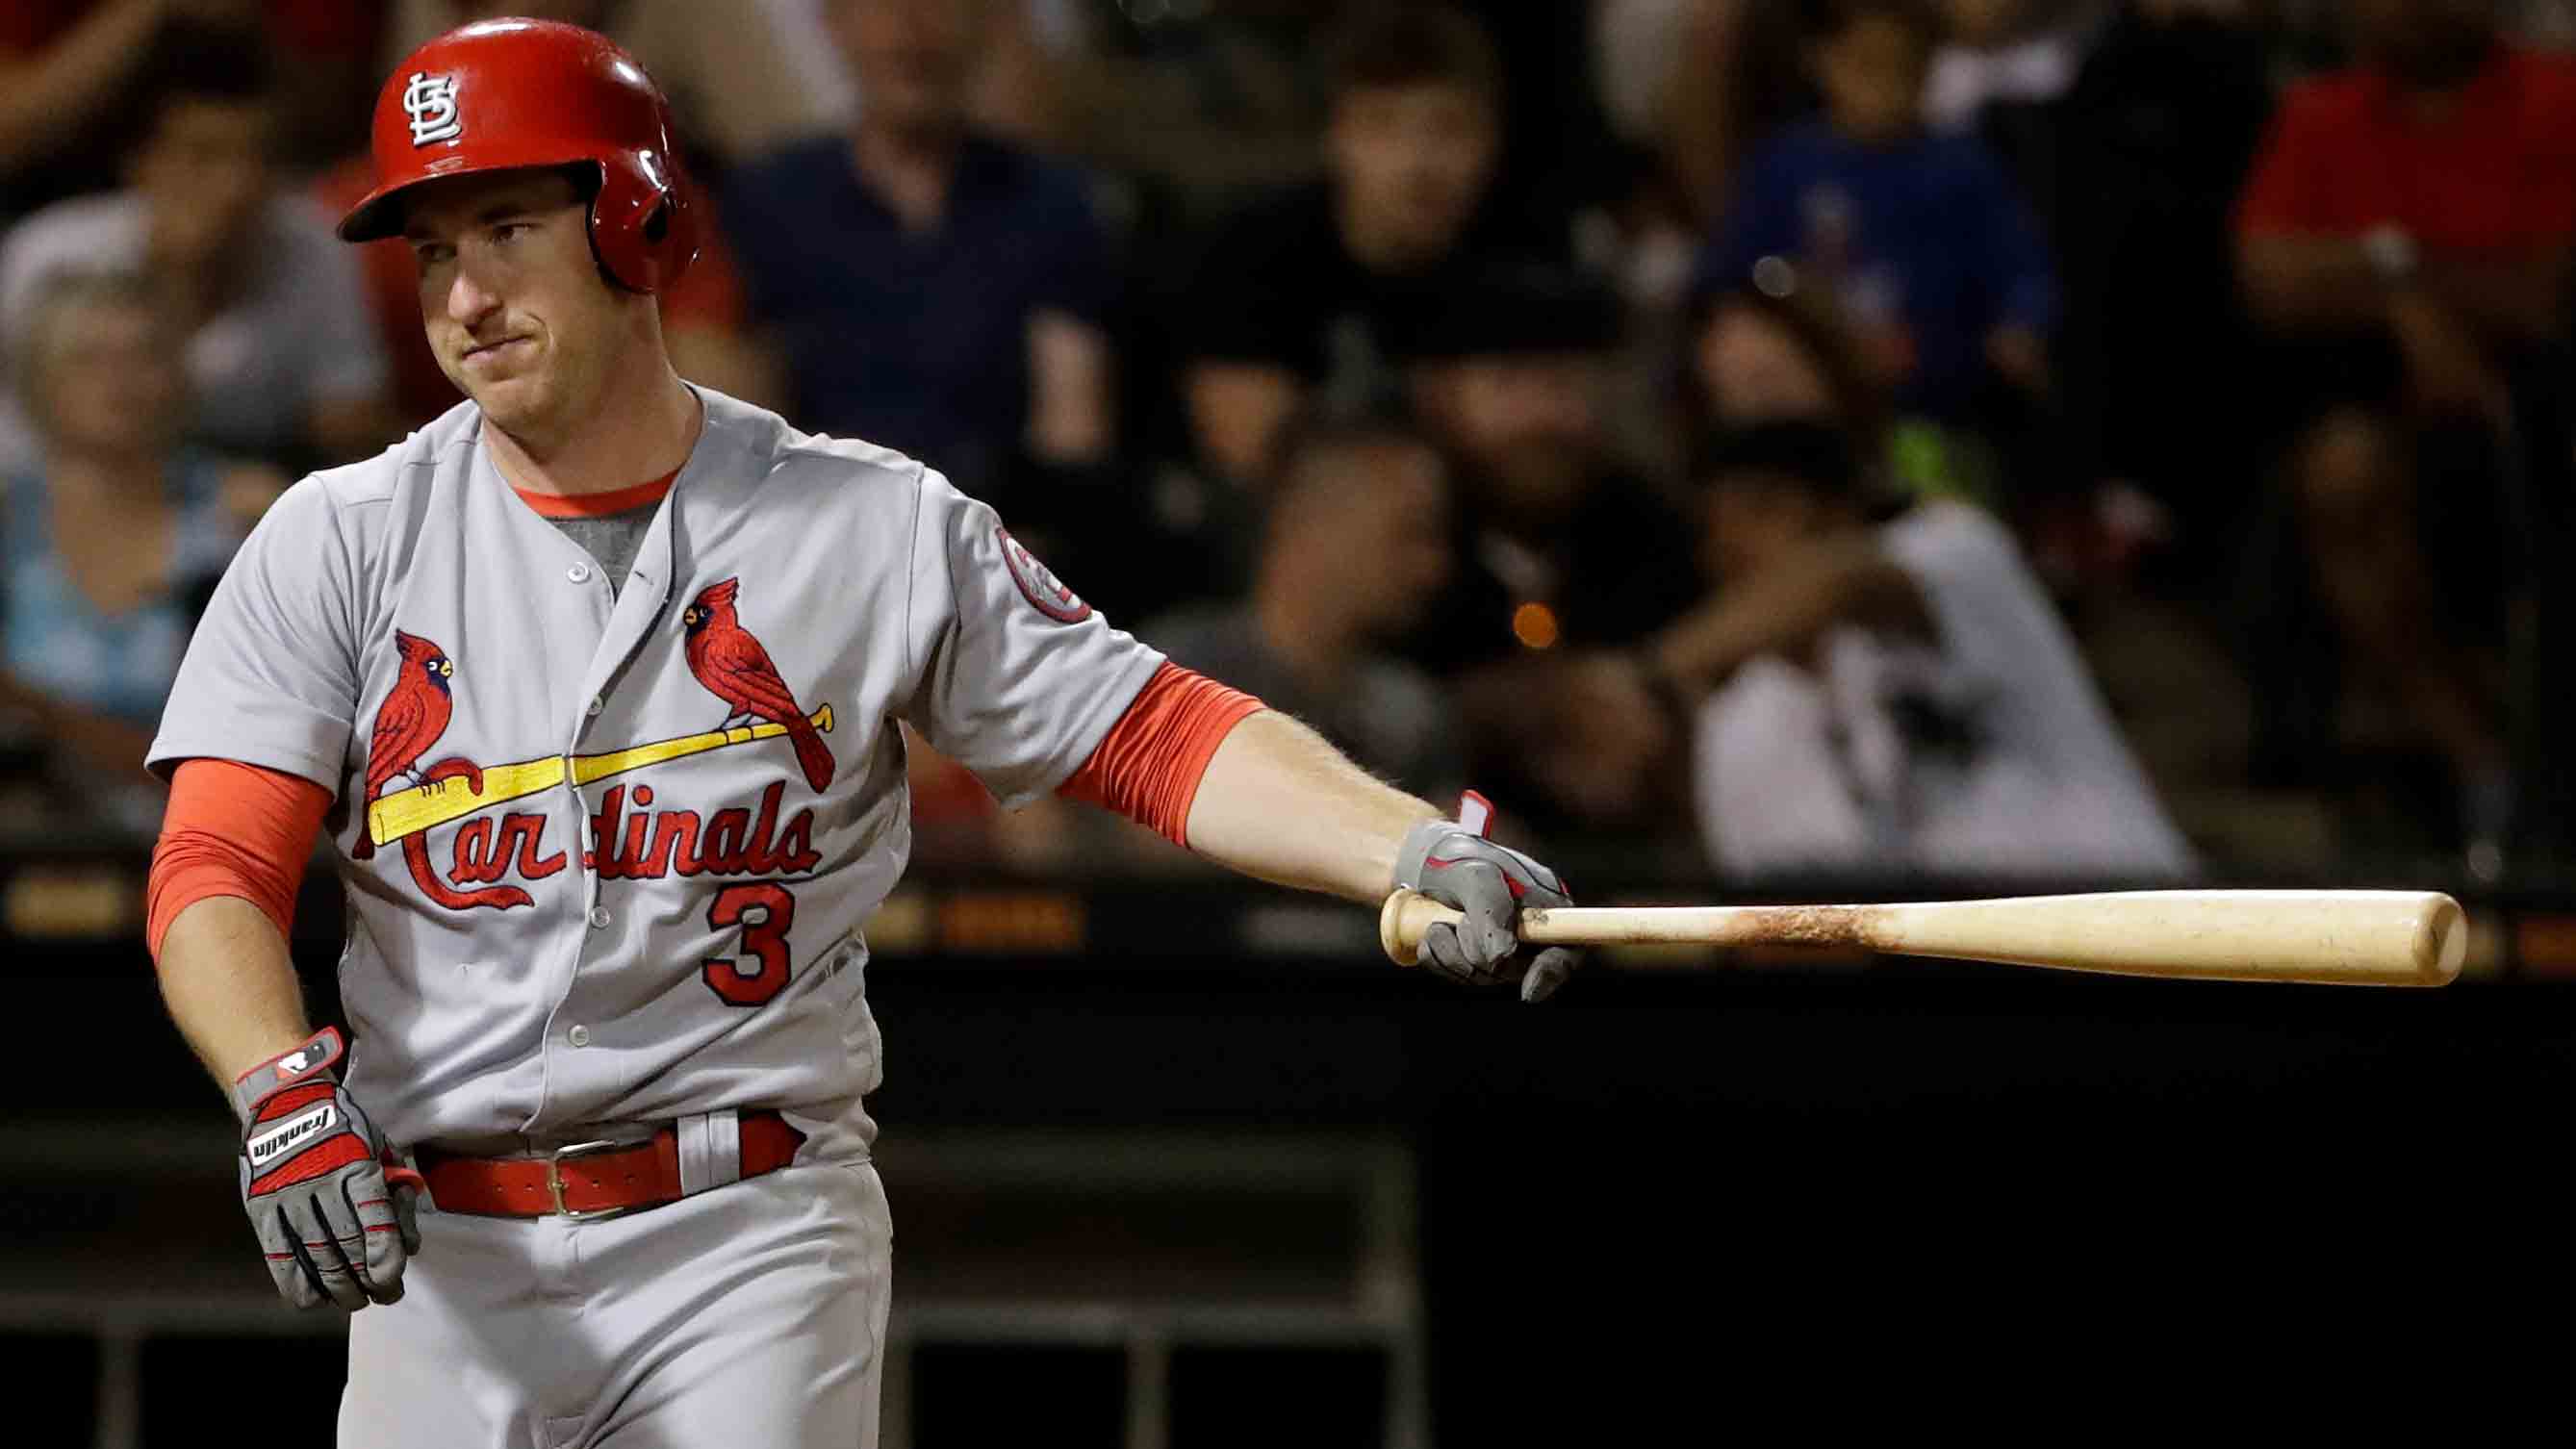 Cardinals offense disappears as White Sox take game 4-0, split series